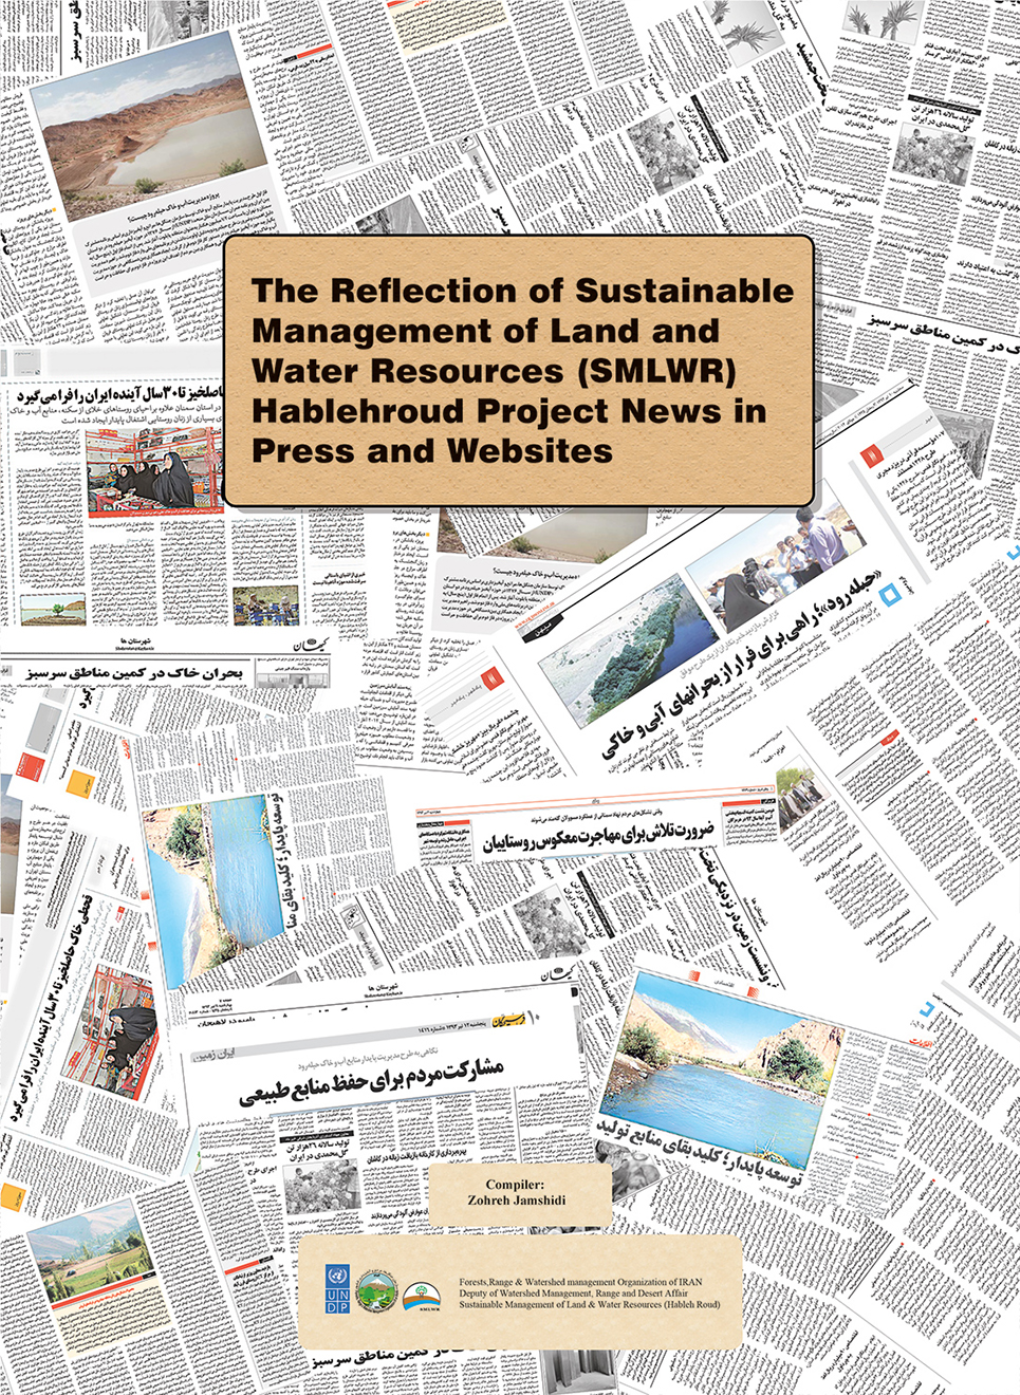 The Reflection of SMLWR Project News in Press and Websites